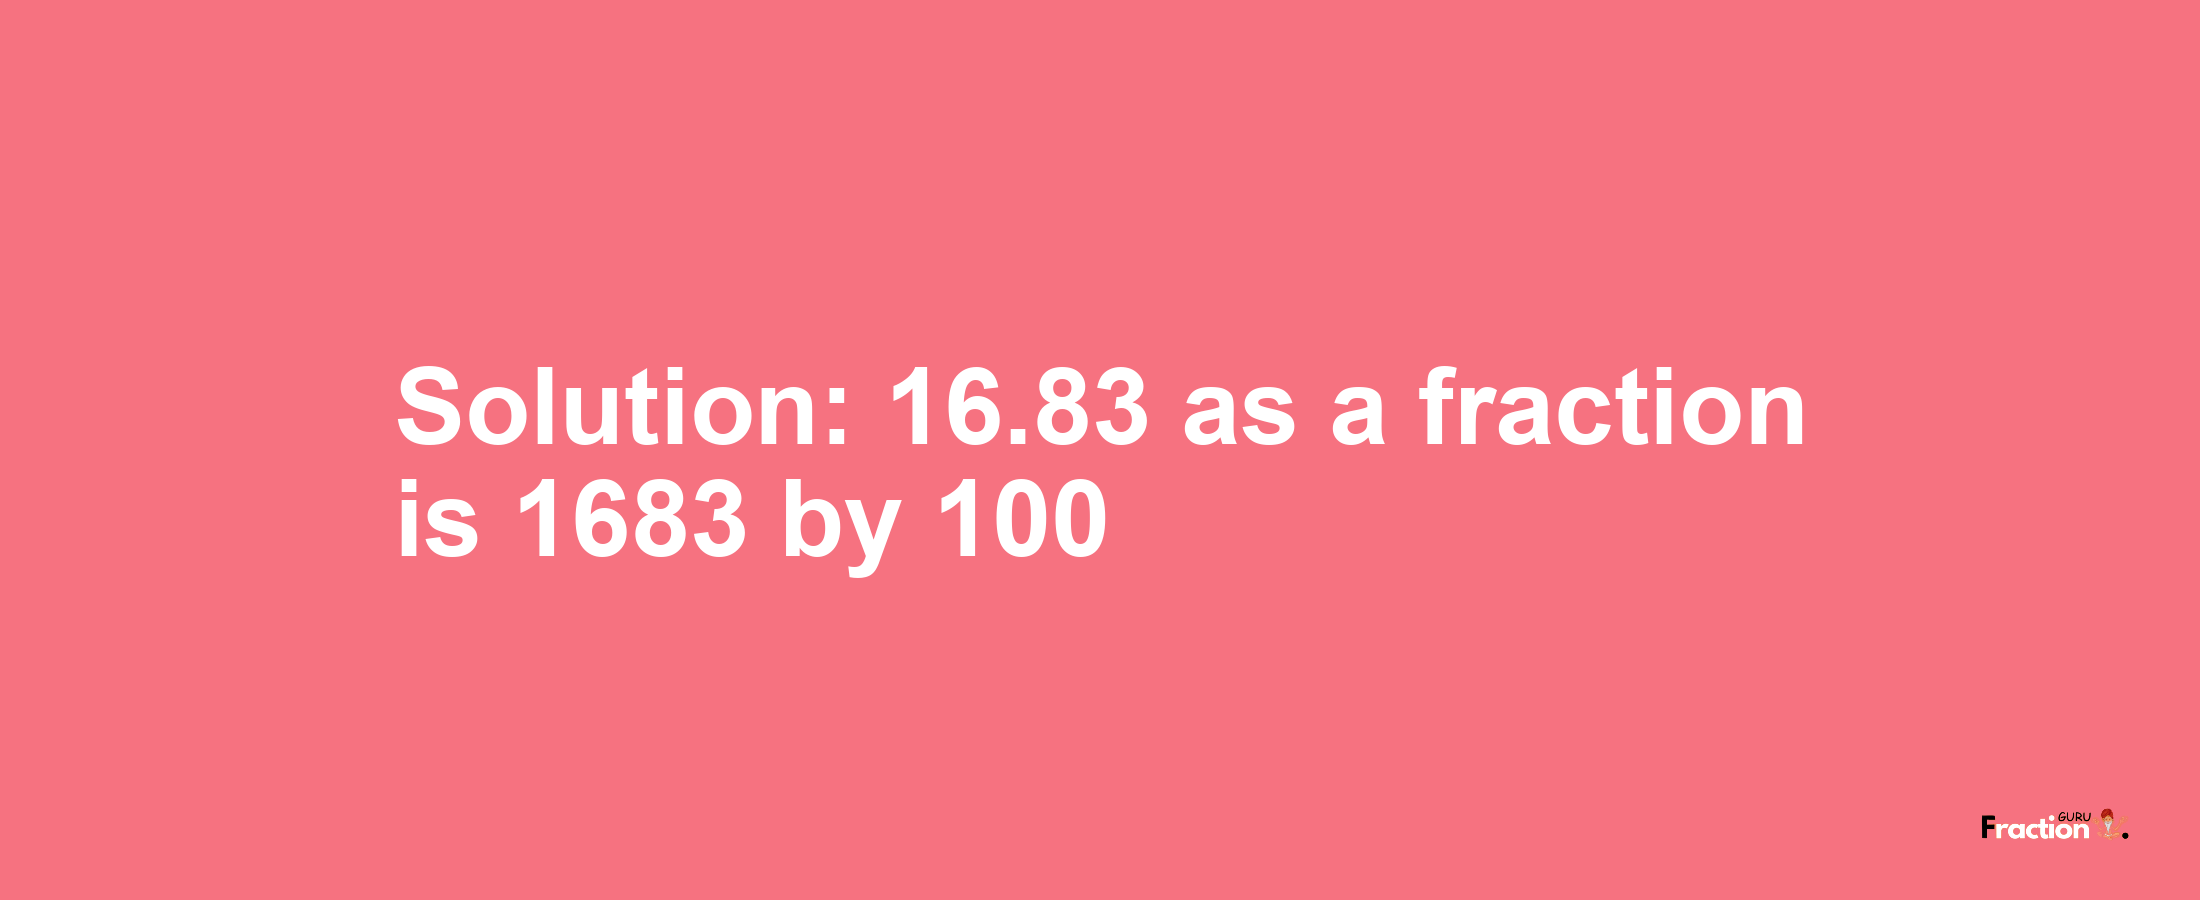 Solution:16.83 as a fraction is 1683/100